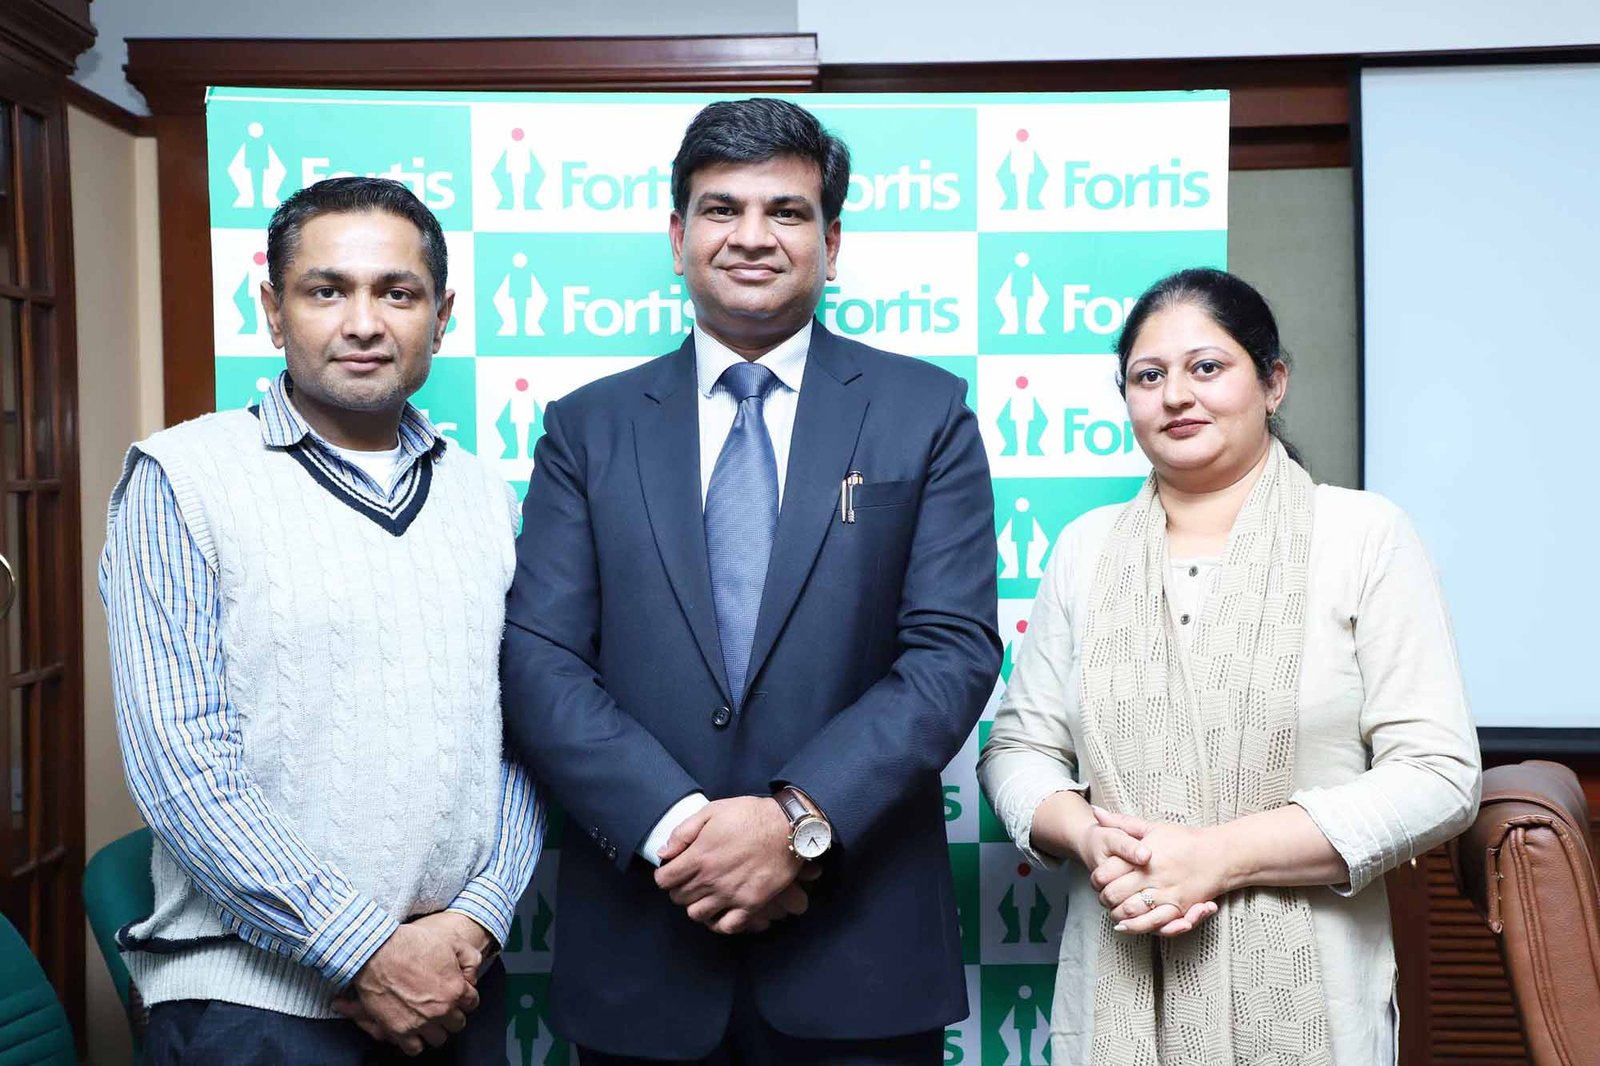 Fortis Urology Transplant Surgeon Defies Medical Science To Save Life, Lifeinchd